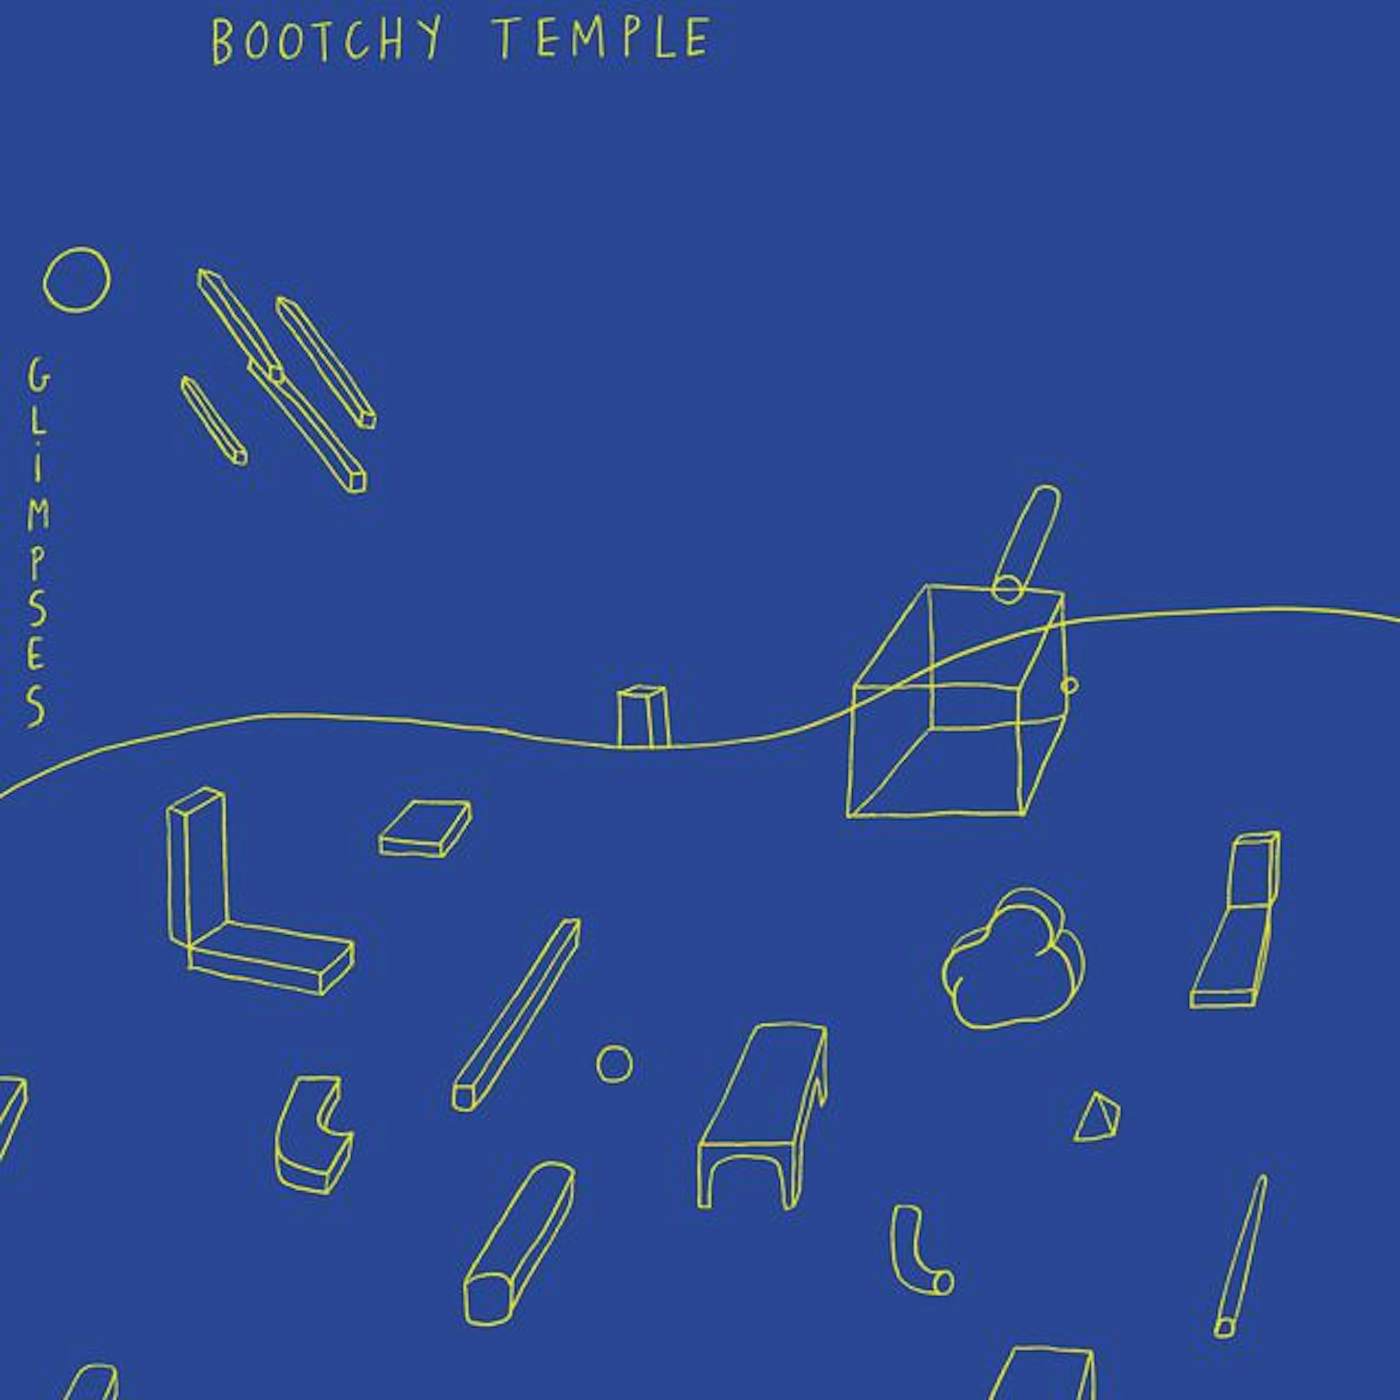 Bootchy Temple